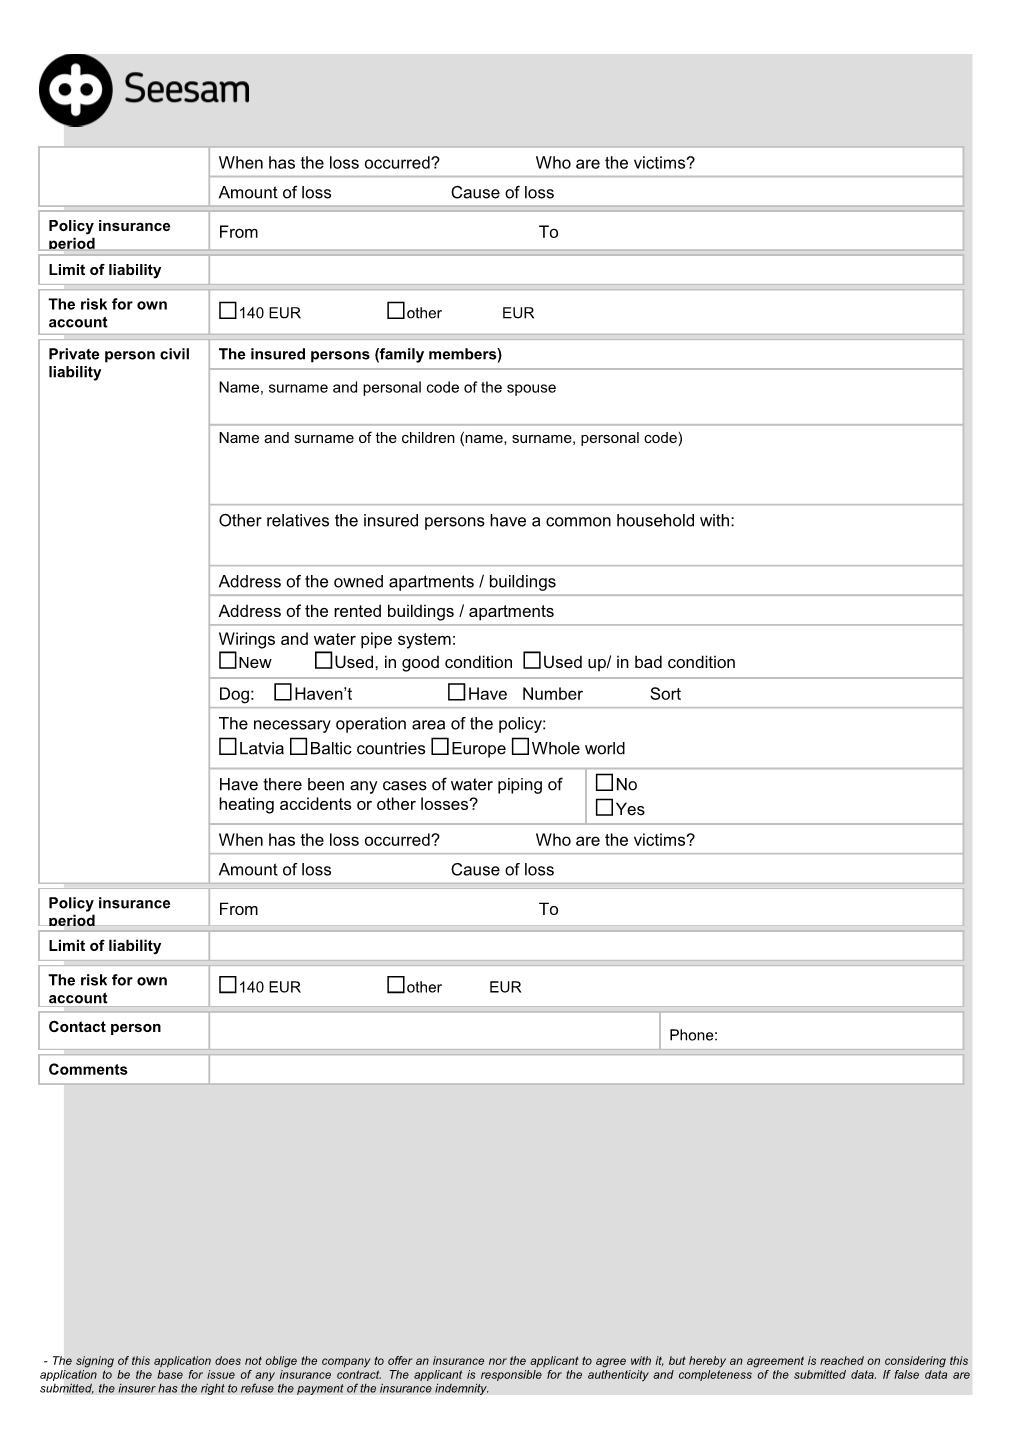 Application for Physical Person Civil Liability Insurance 1